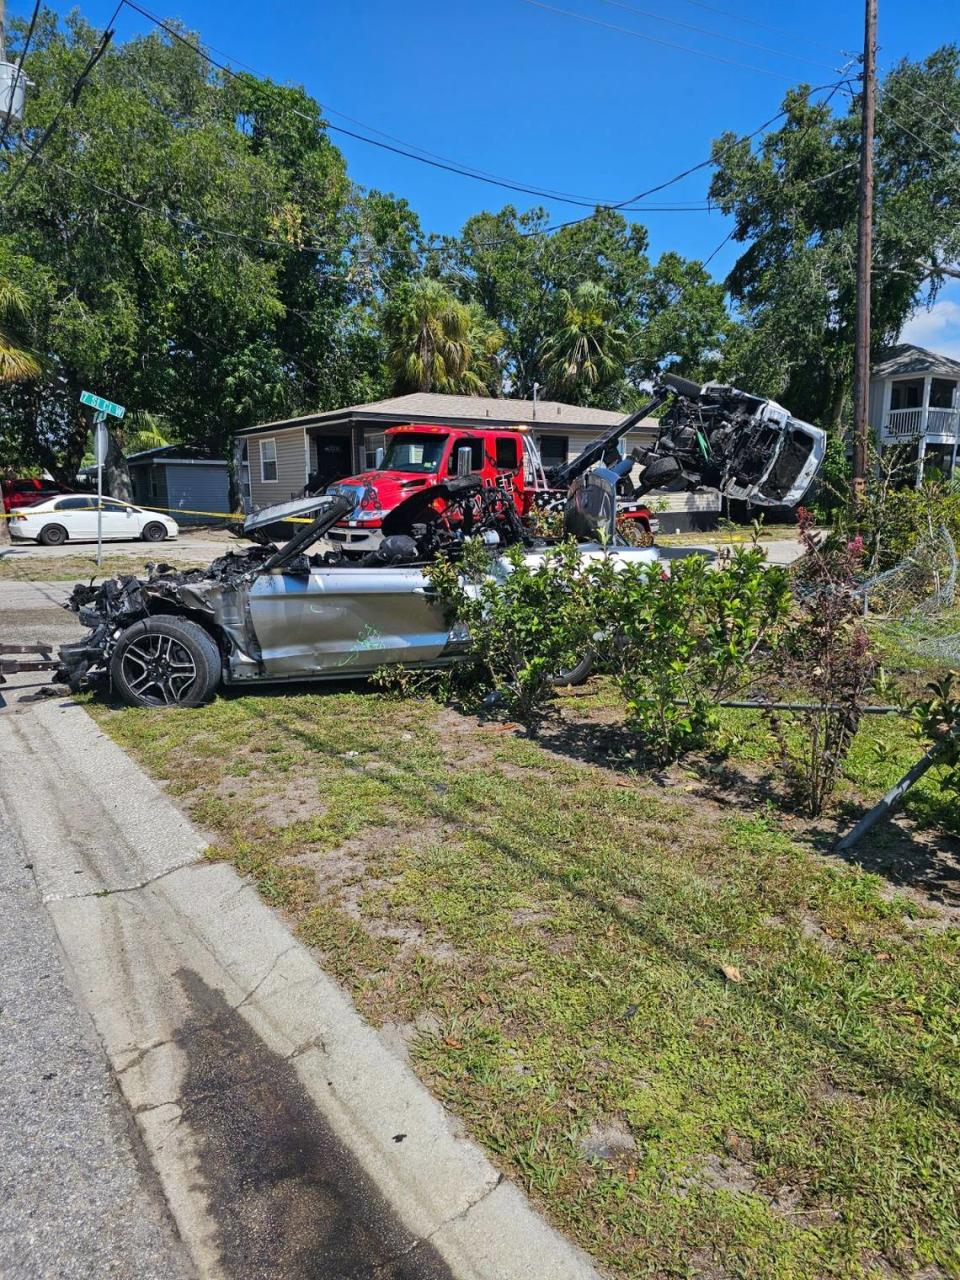 Bradenton police say two stolen vehicles crashed in the 700 block of 12th Ave. W., with one engulfed in flames and the other on its side after hitting the roof of a home.